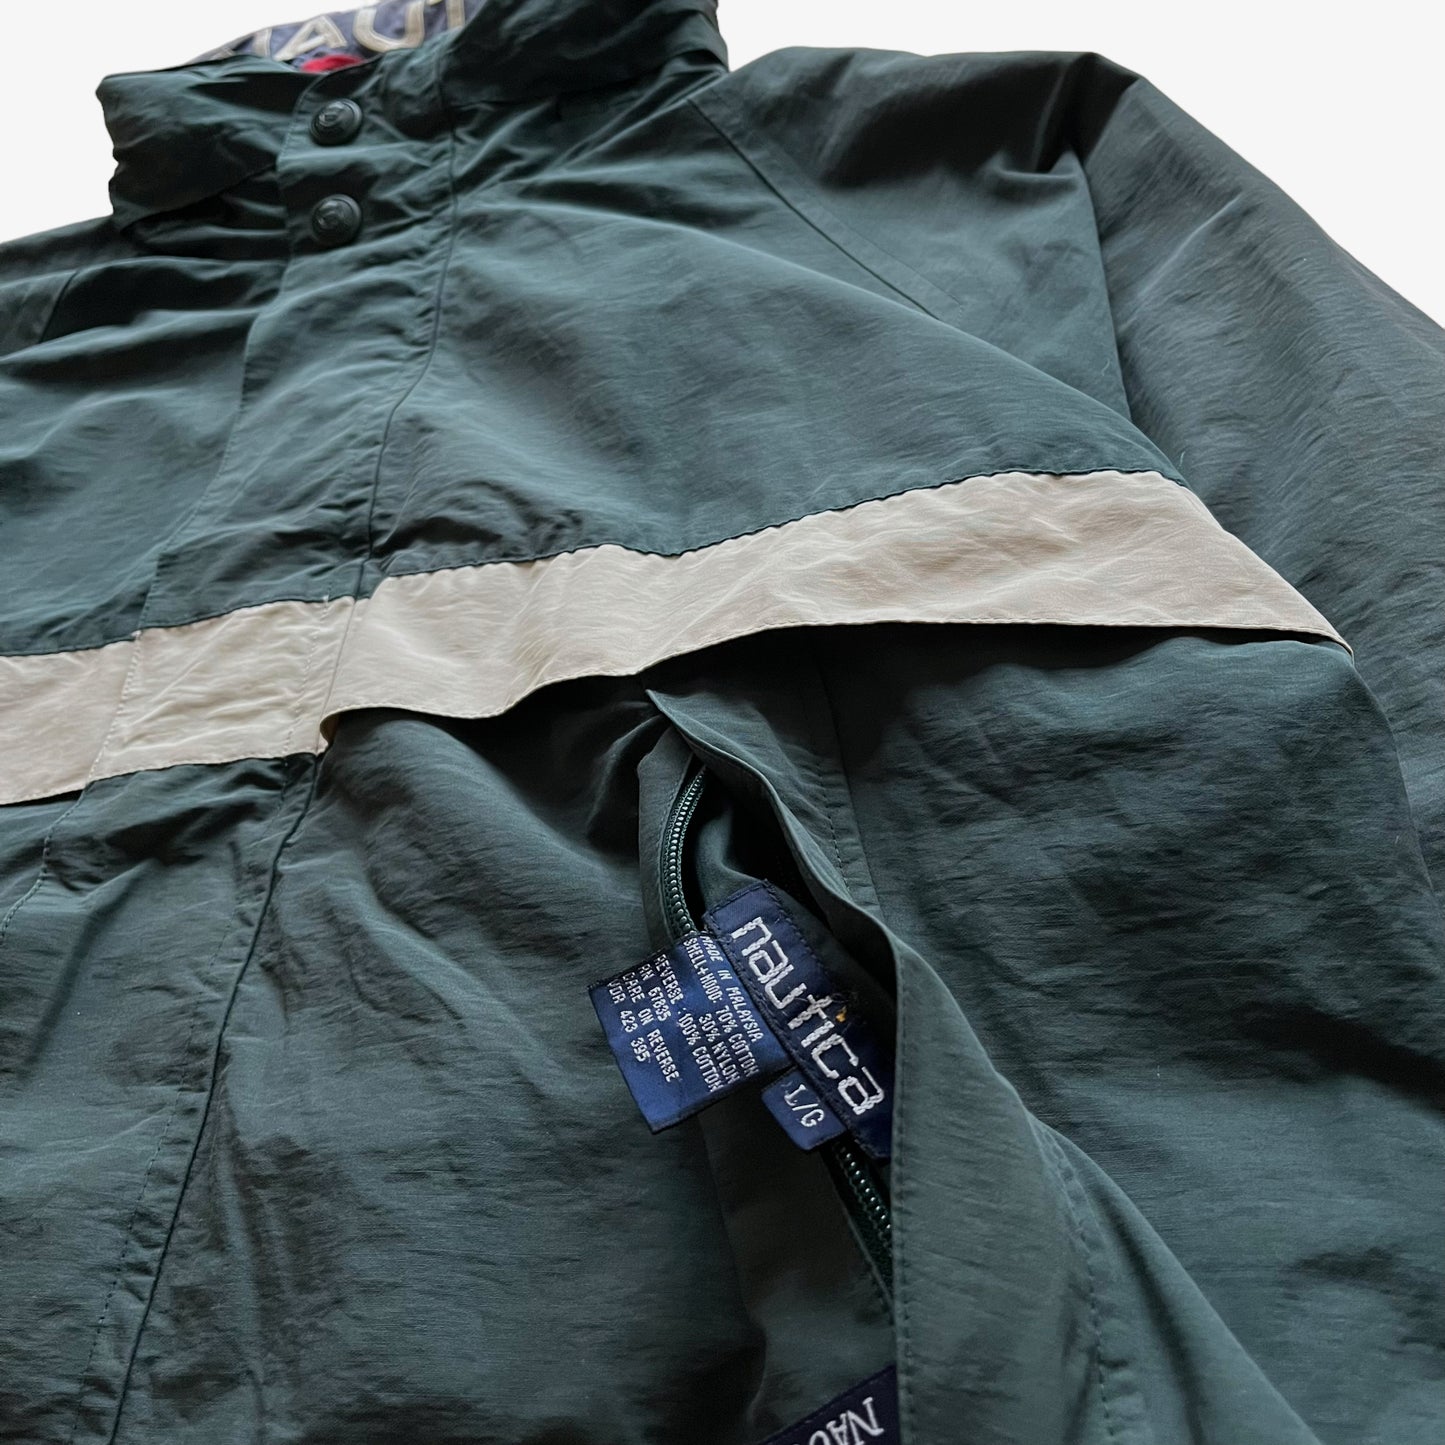 Vintage 90s Nautica Sport Reversible Sailing Jacket With Fold Away Hood Label - Casspios Dream